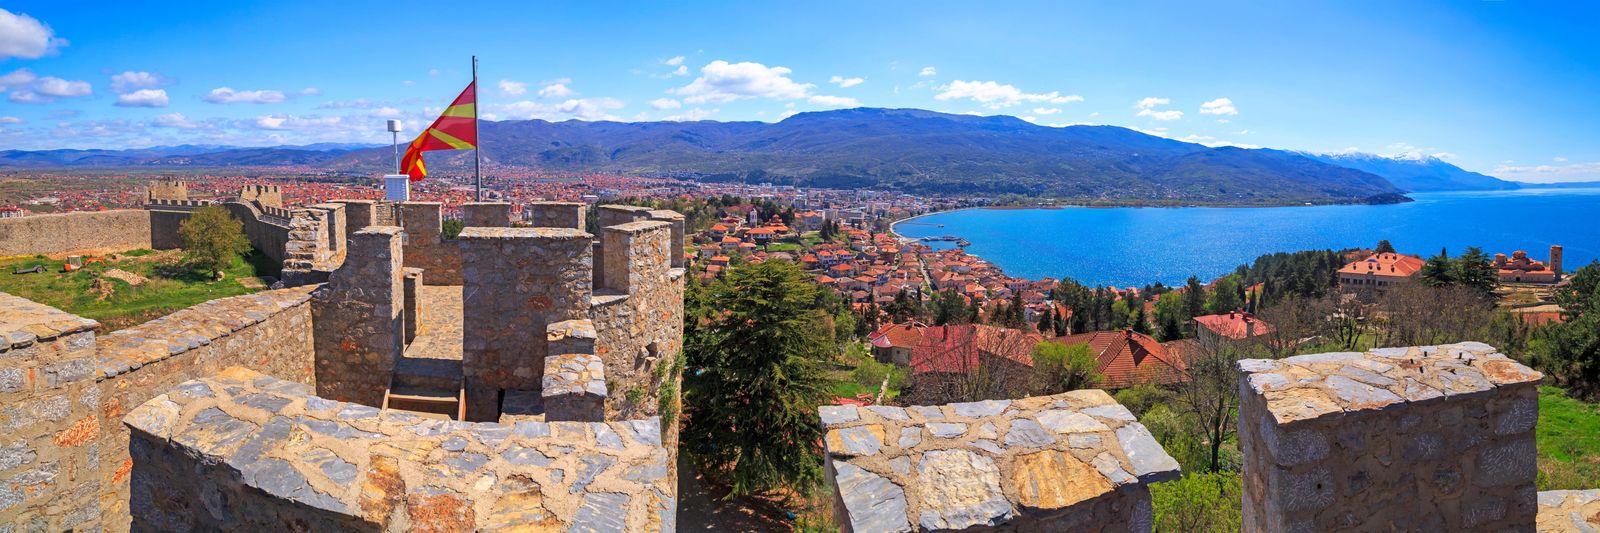 Samuel's Fortress - Best Things To See In Lake Ohrid